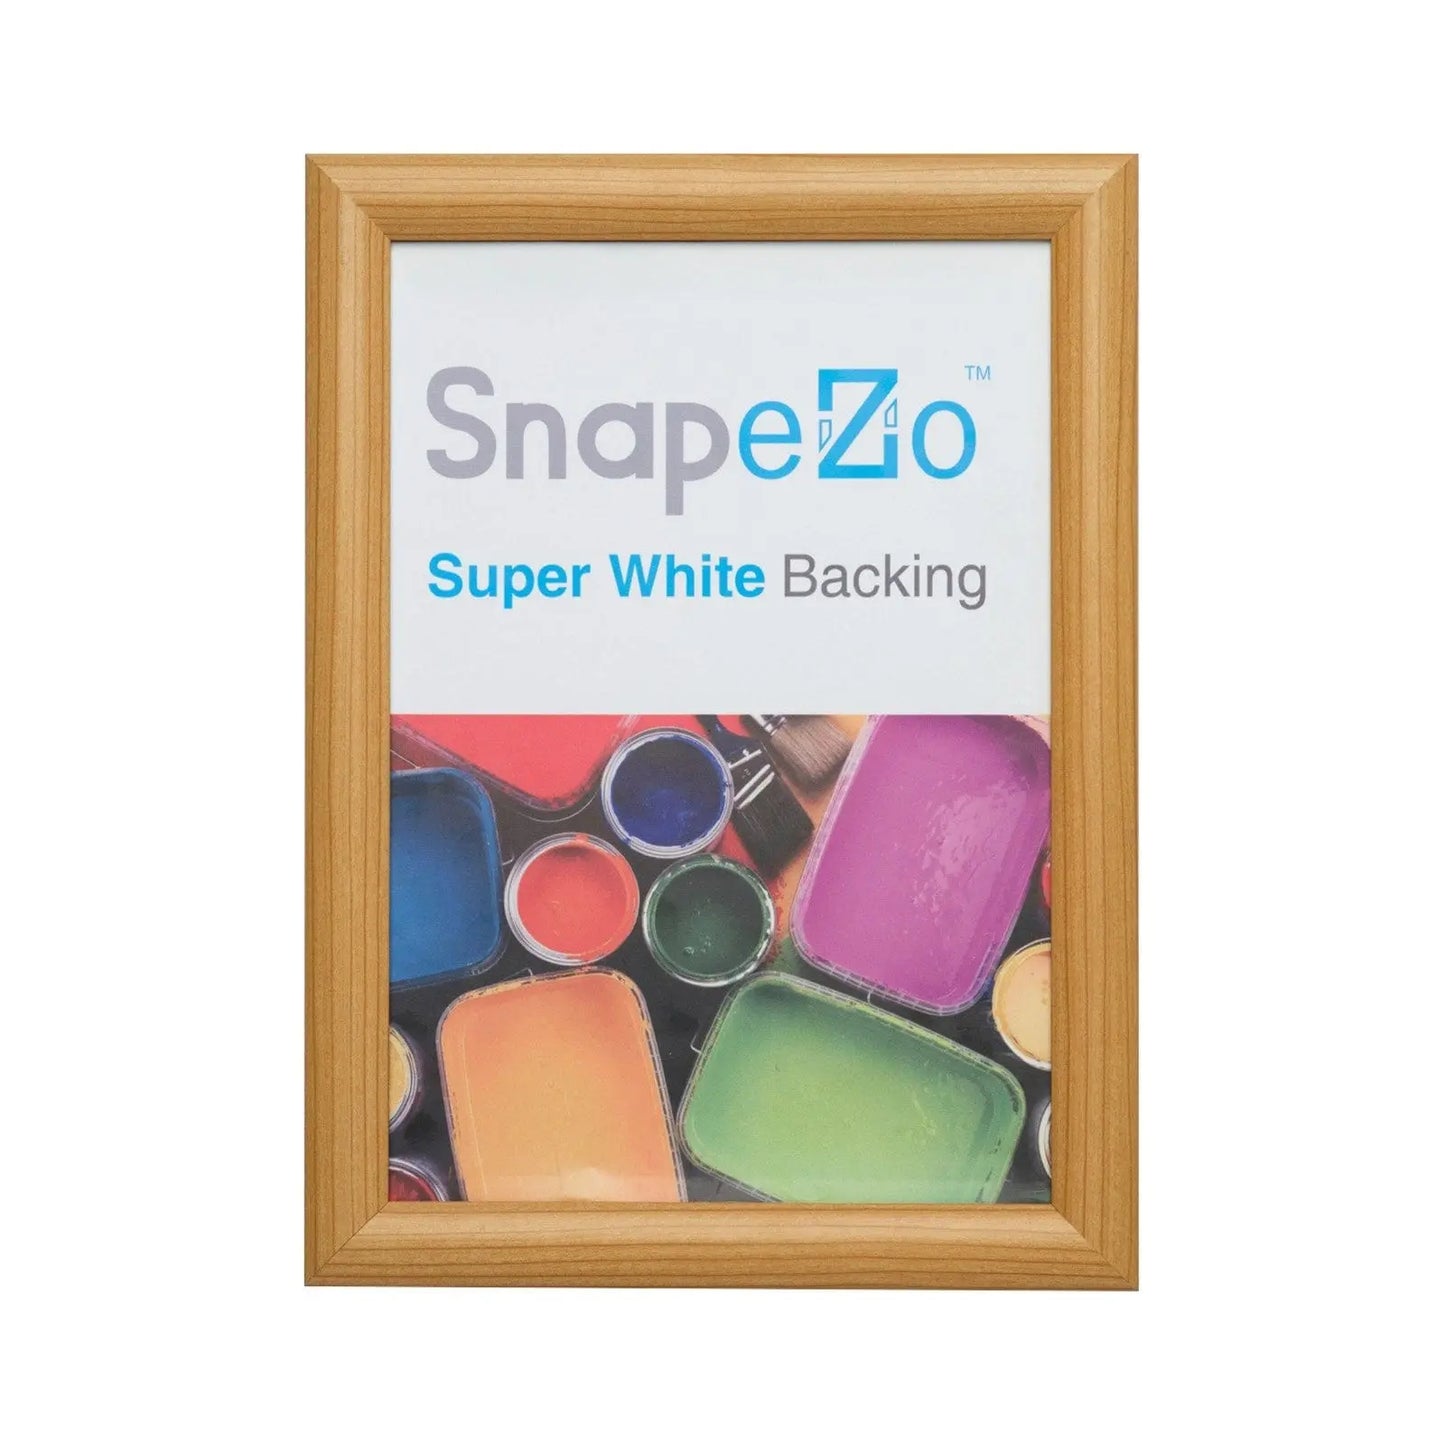 Light Wood snap frame poster size 5x7 - 1 inch profile - Snap Frames Direct